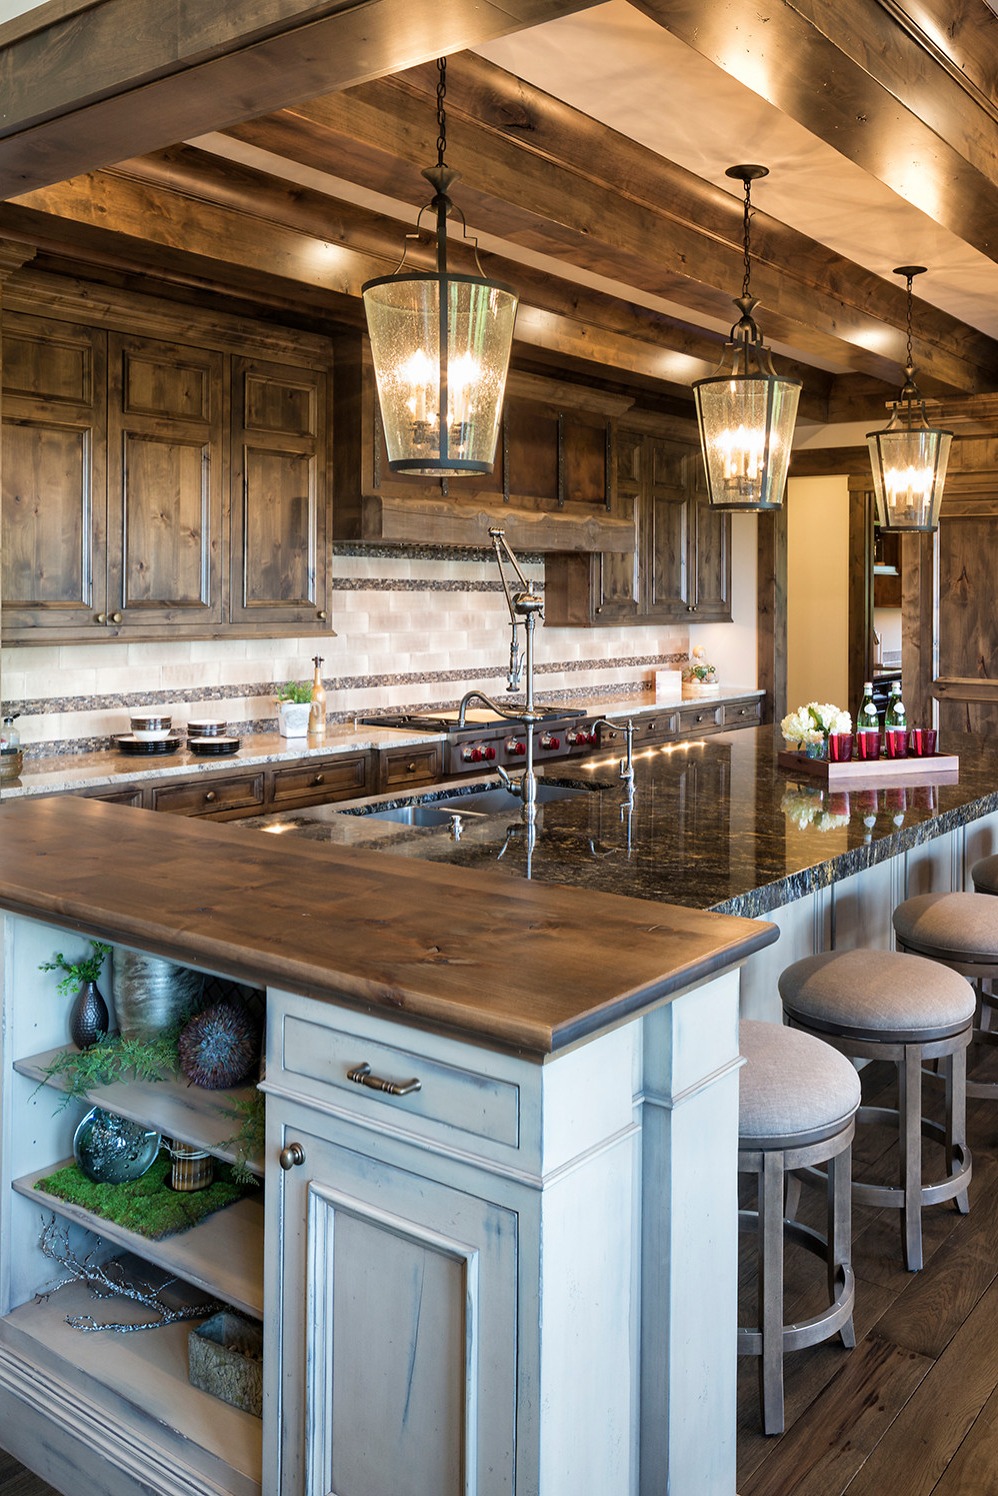 Rustic Country Kitchen Wood Countertops Custom Cabinetry Wooden Beams Focal Point Knotty Pine